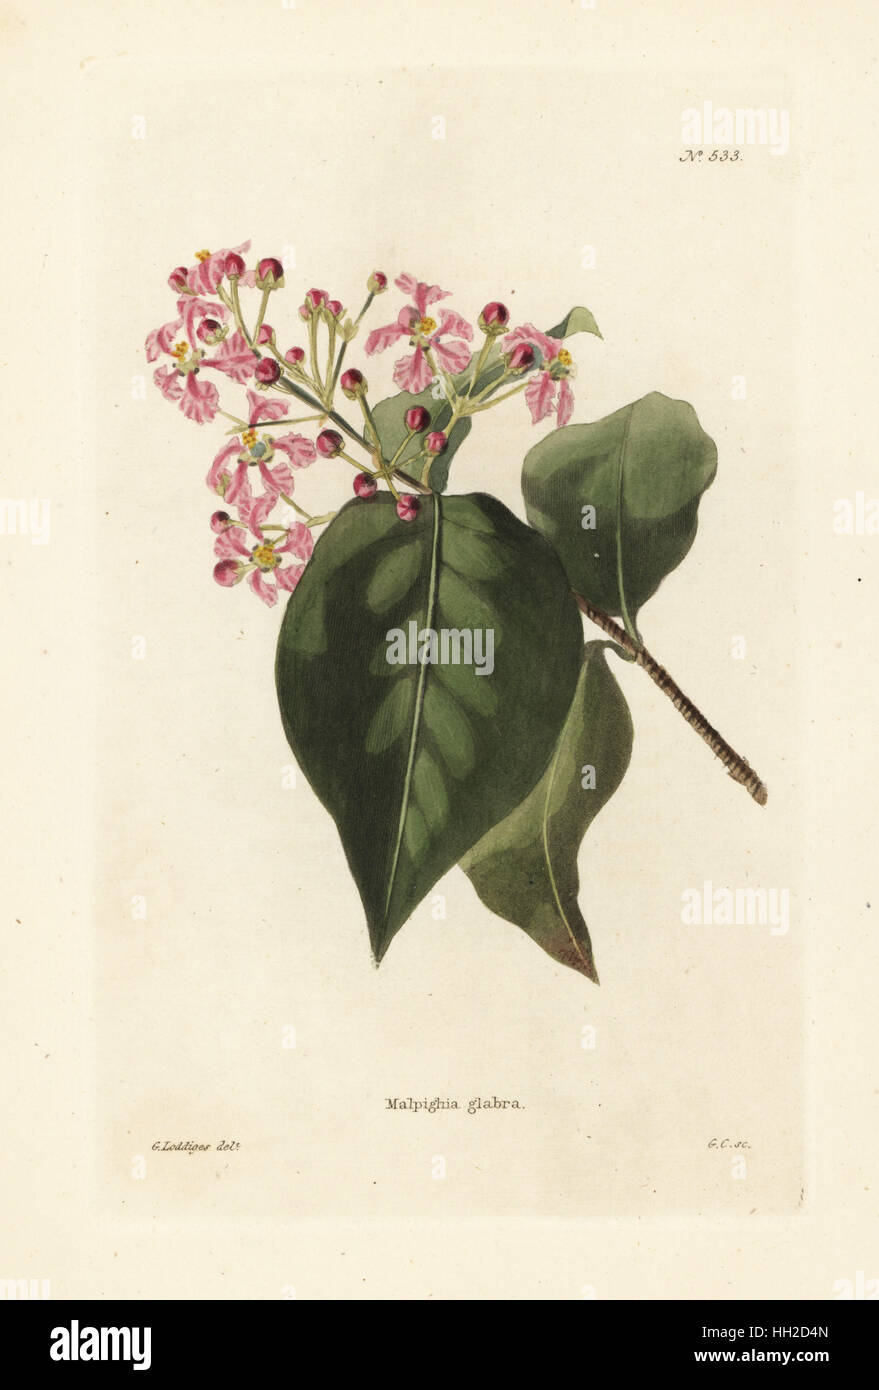 Malpighia glabra. Handcoloured copperplate engraving by George Cooke after an illustration by George Loddiges from Conrad Loddiges' Botanical Cabinet, Hackney, London, 1821. Stock Photo